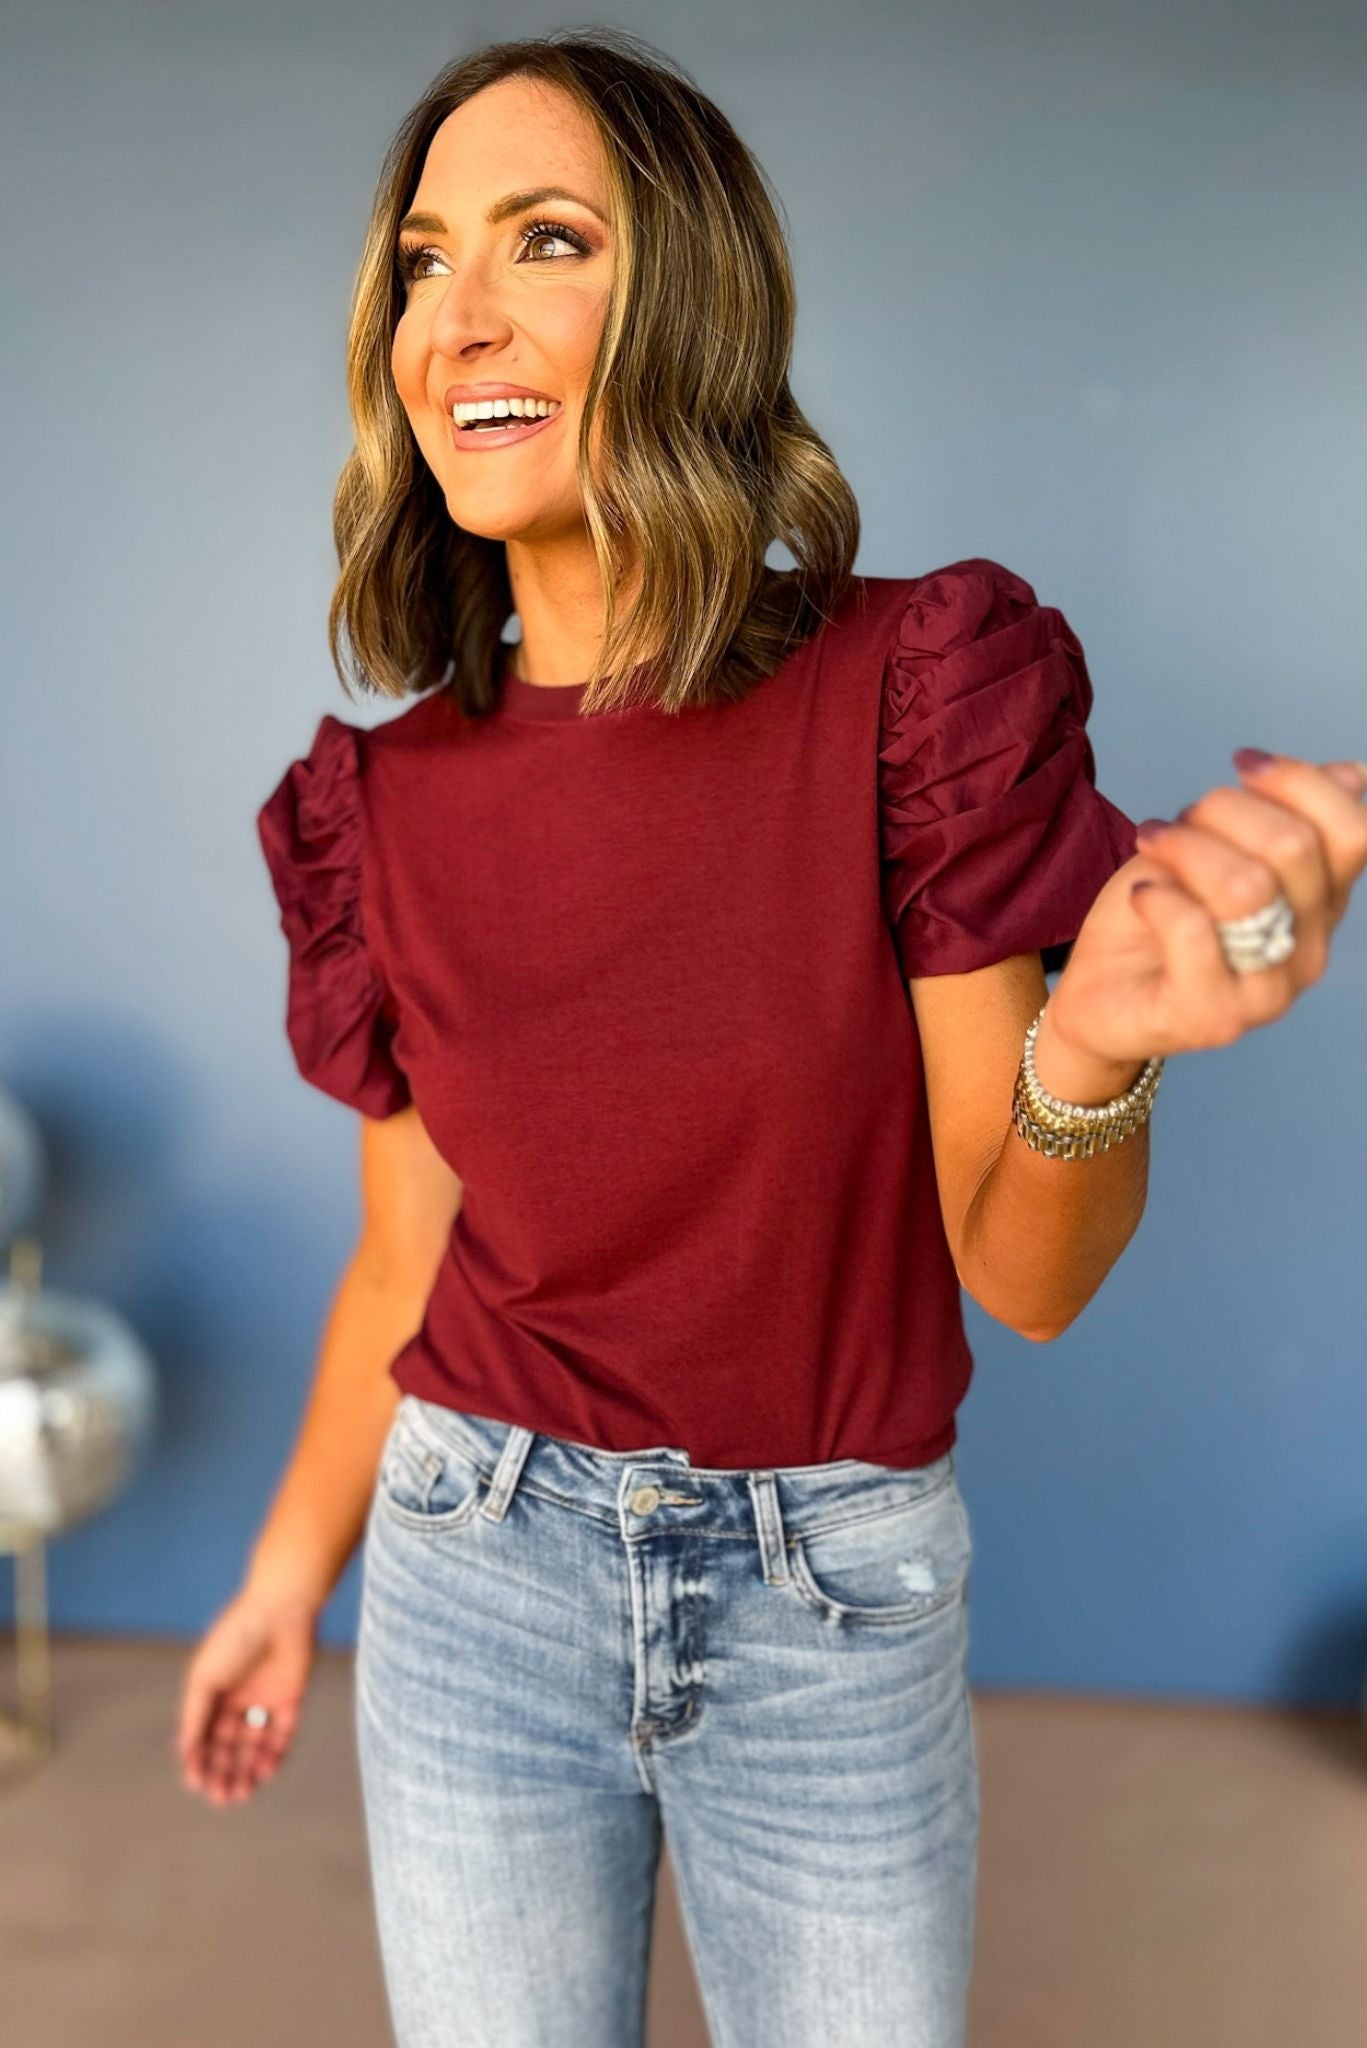 Load image into Gallery viewer, SSYS The Rachel Top In Burgundy, SSYS the label, elevated basic, must have basic, must have style, must have fall, fall top, elevated style, mom style, shop style your senses by mallory fitzsimmons
